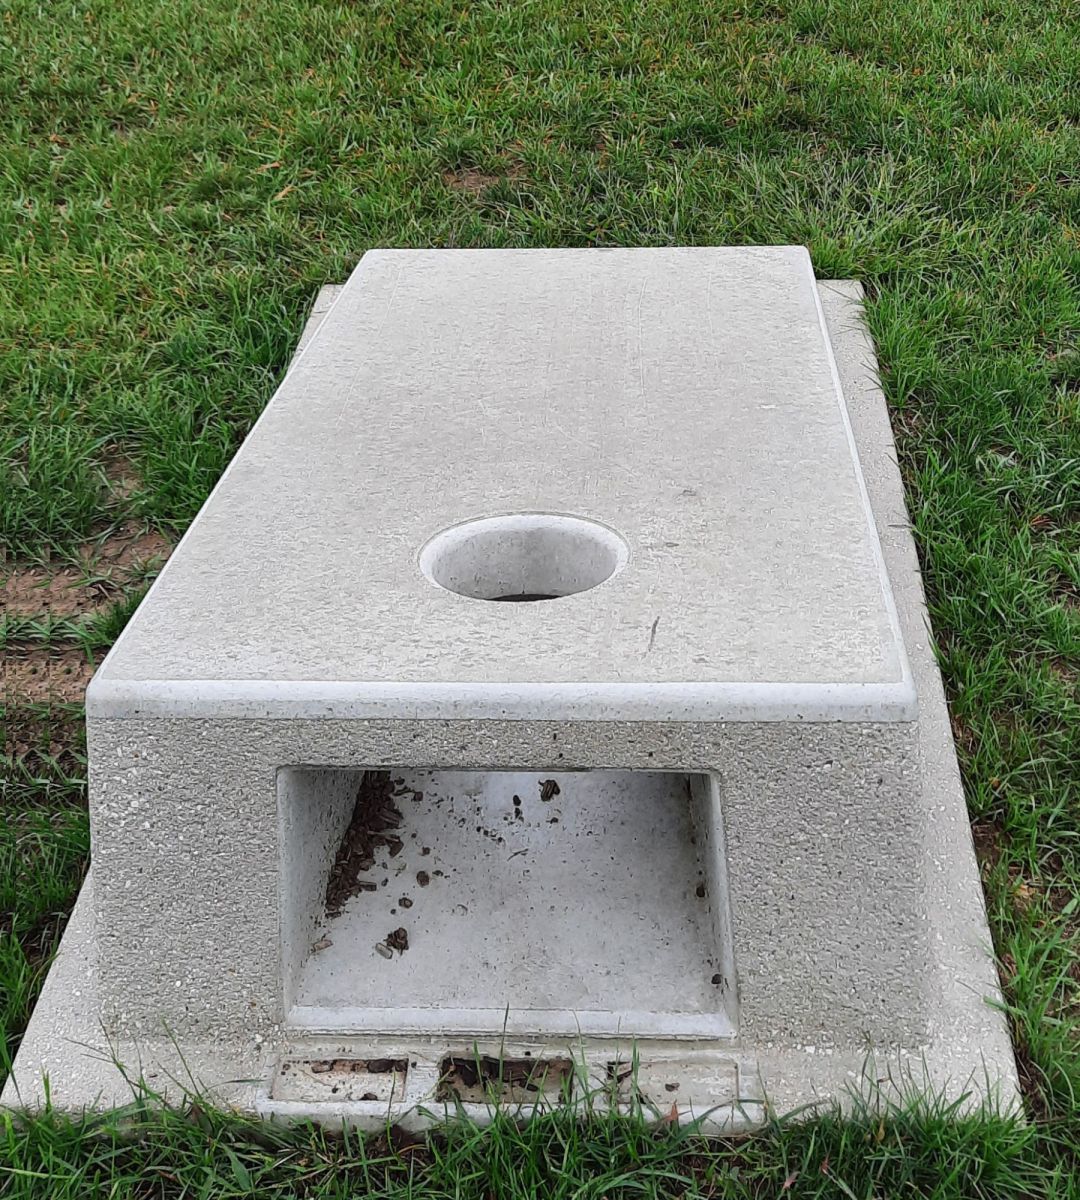 Concrete target with hole